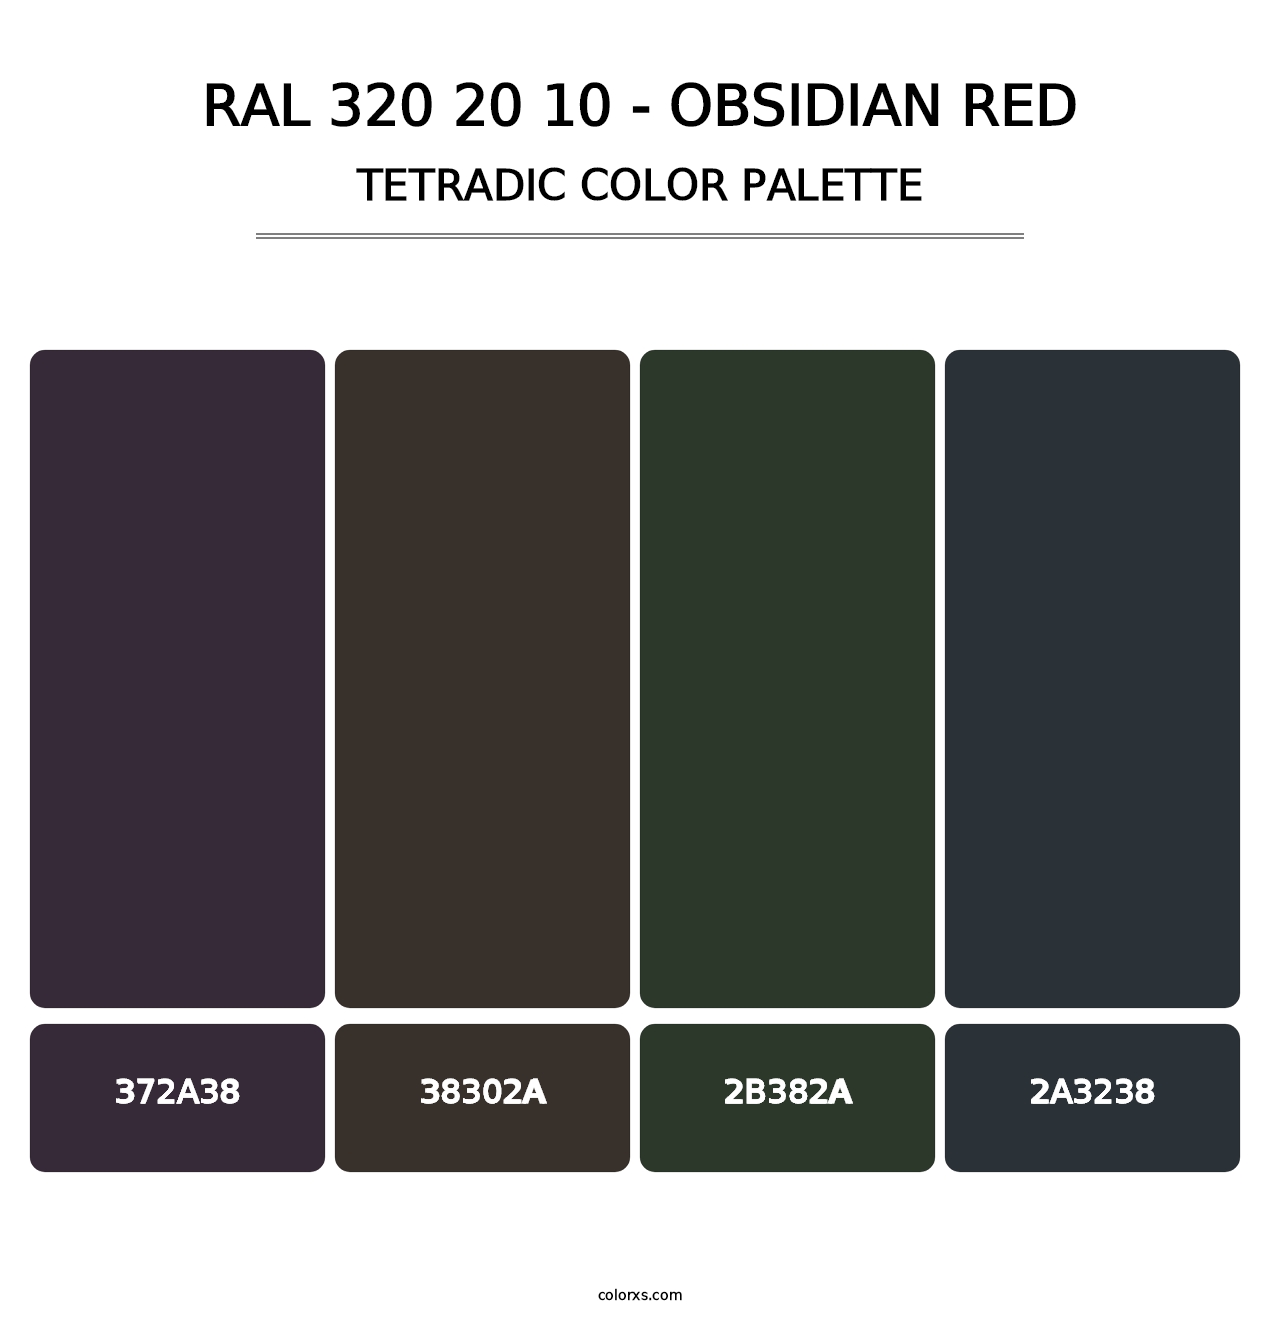 RAL 320 20 10 - Obsidian Red - Tetradic Color Palette